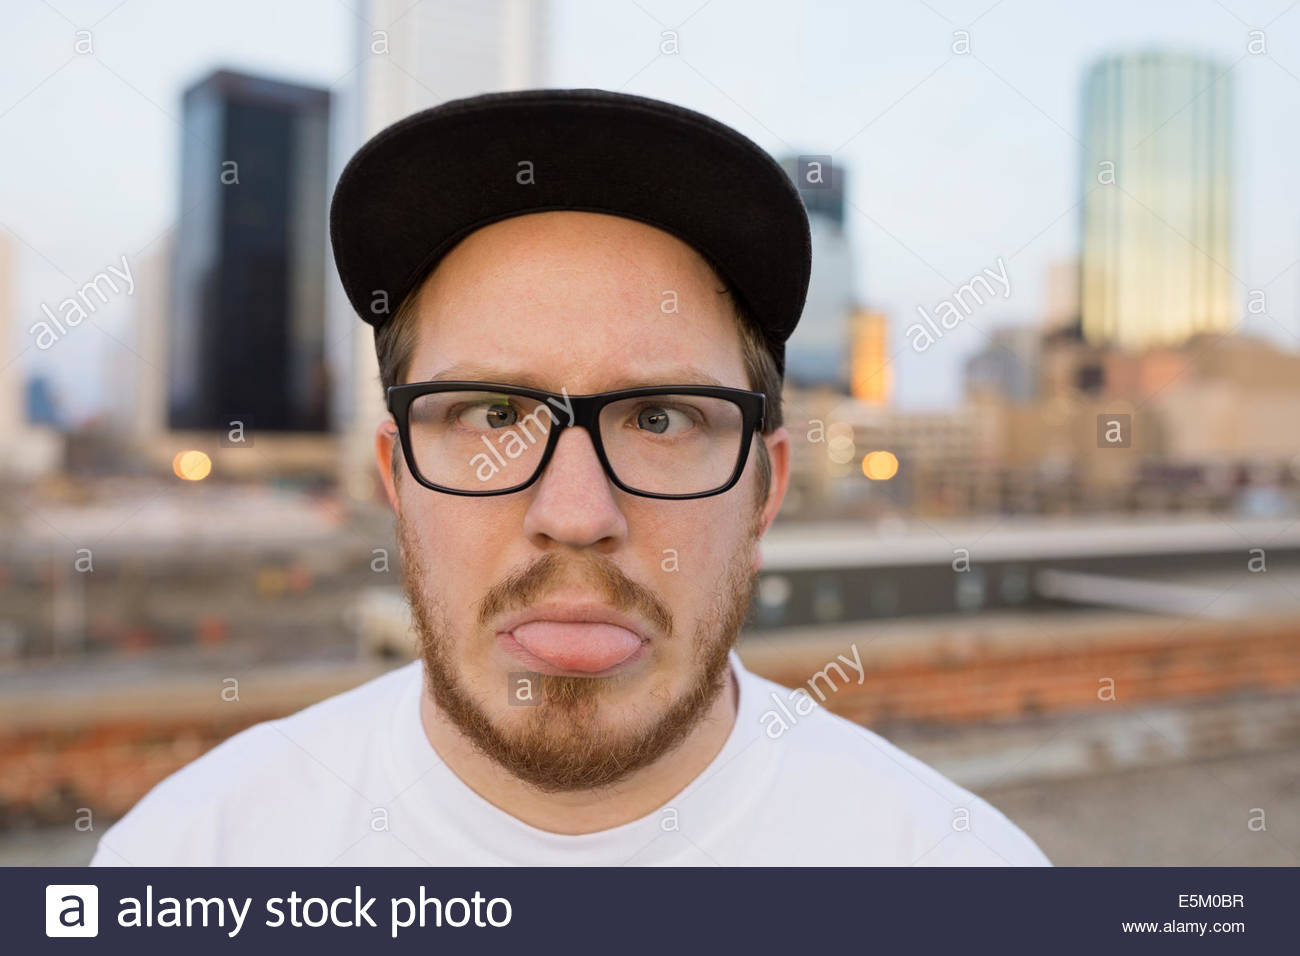 Portrait of man making a face on urban rooftop Stock Photo